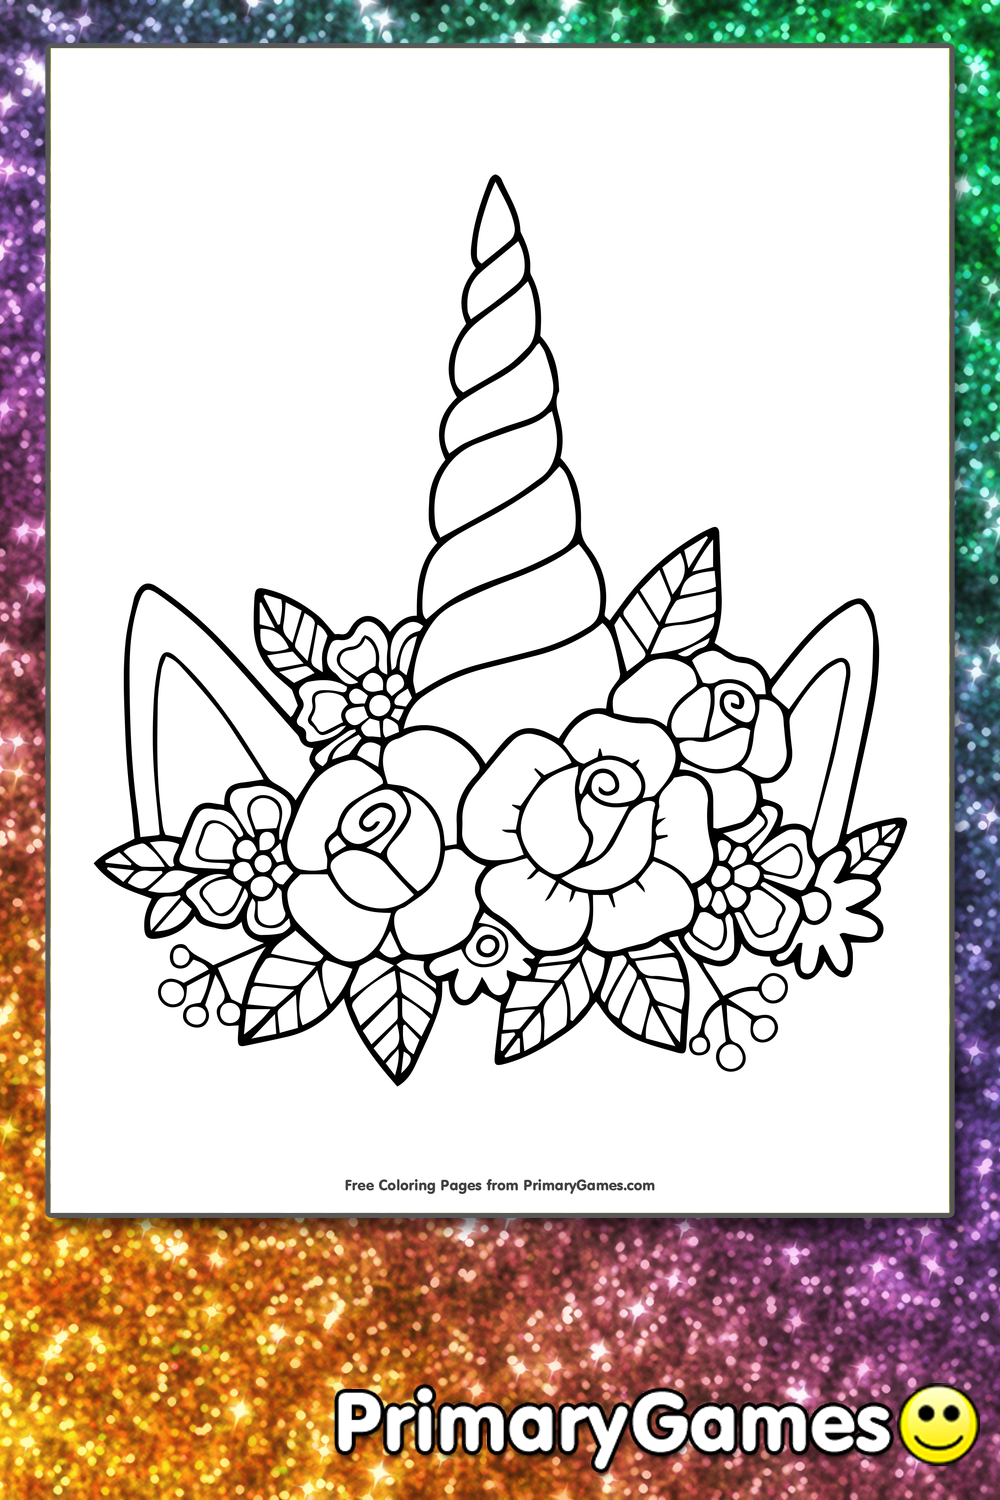 Unicorn horn and flowers coloring page â free printable pdf from